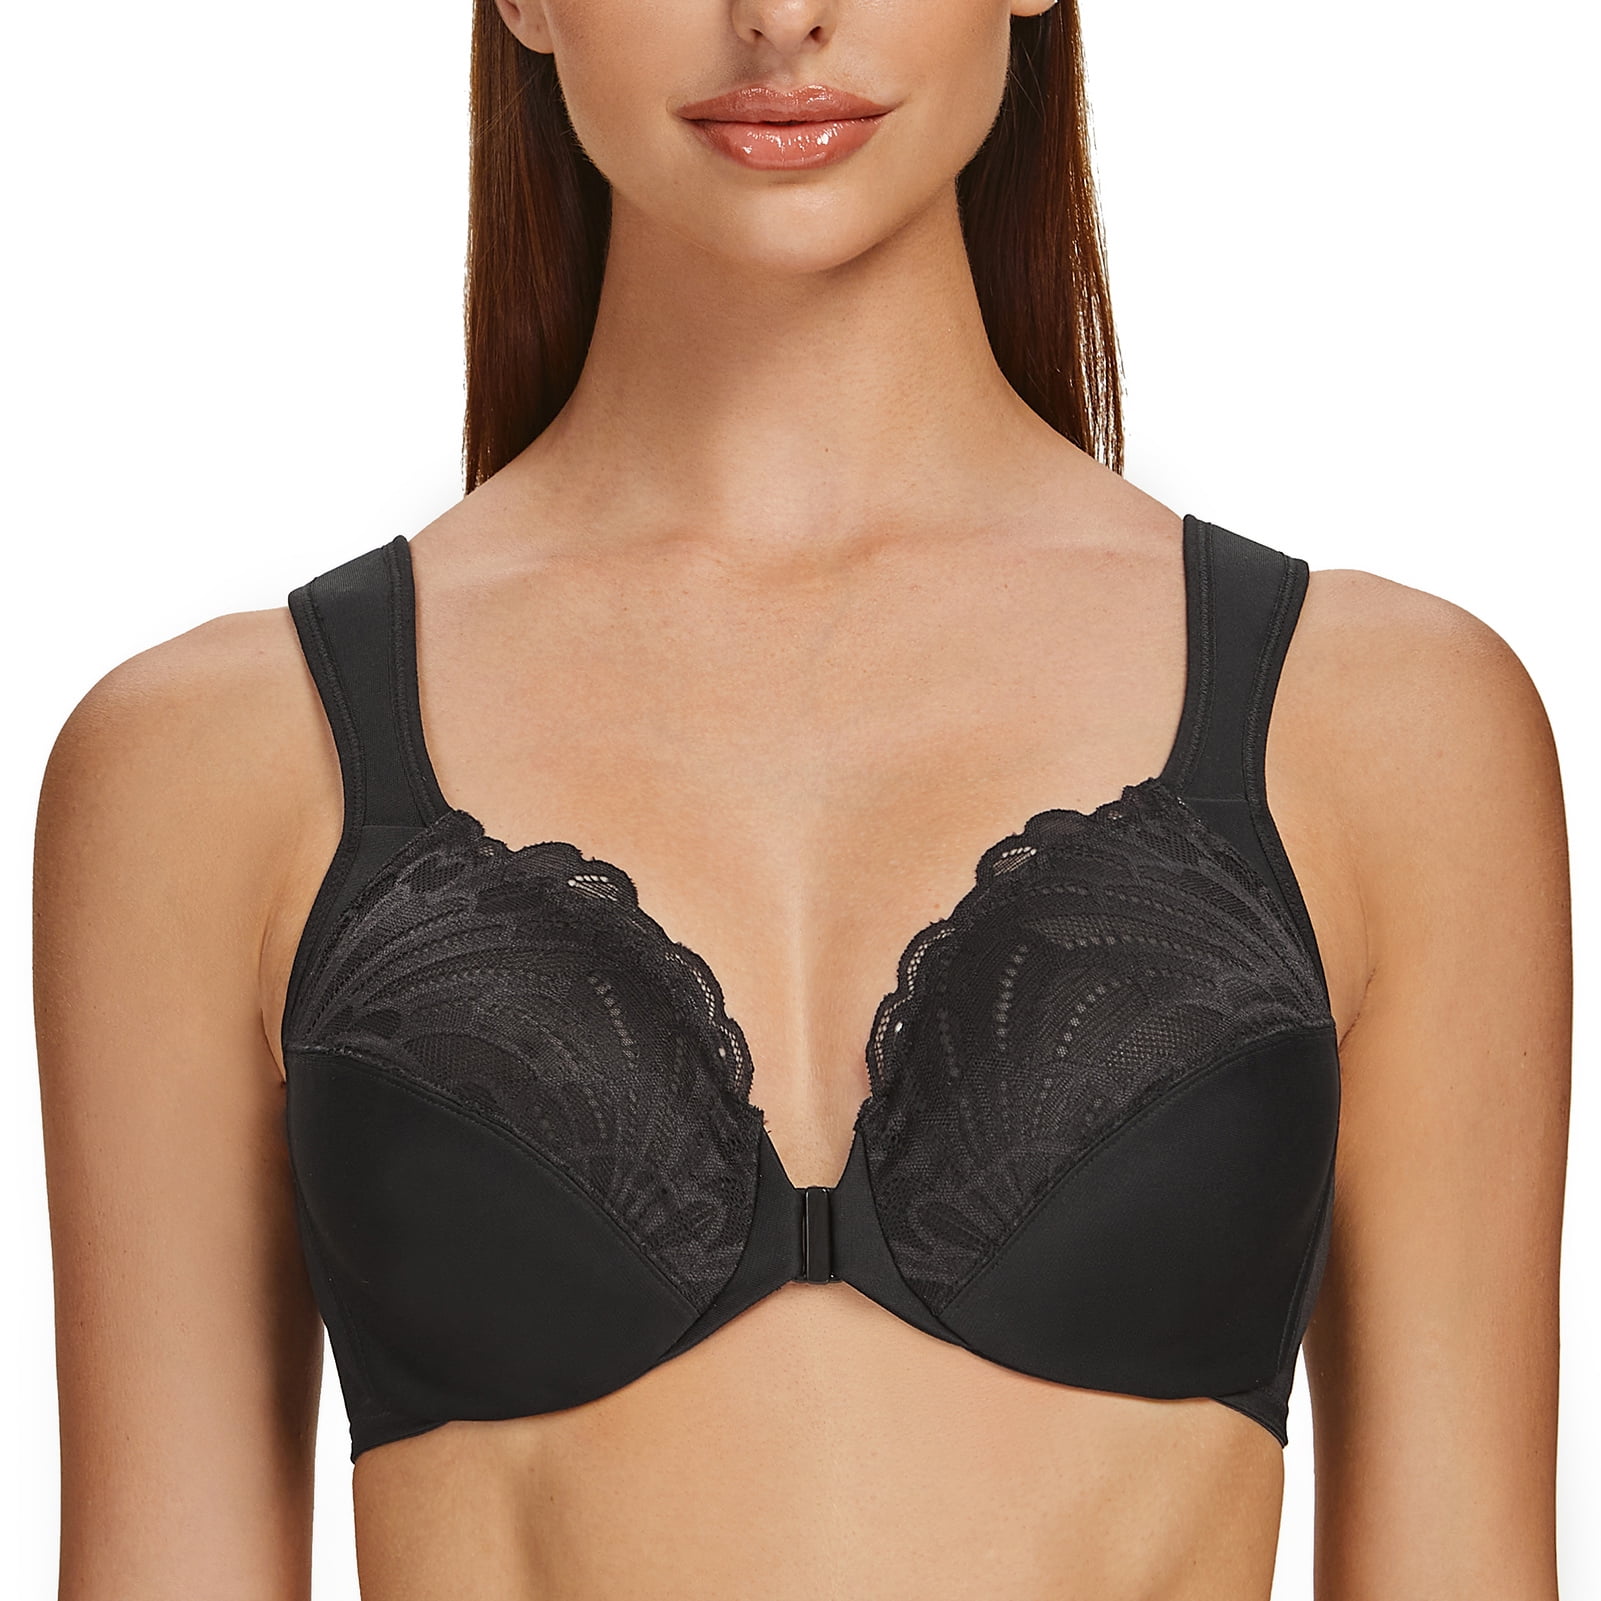 MELENECA Underwire Front Closure Bras for Women Pale Nude 42B